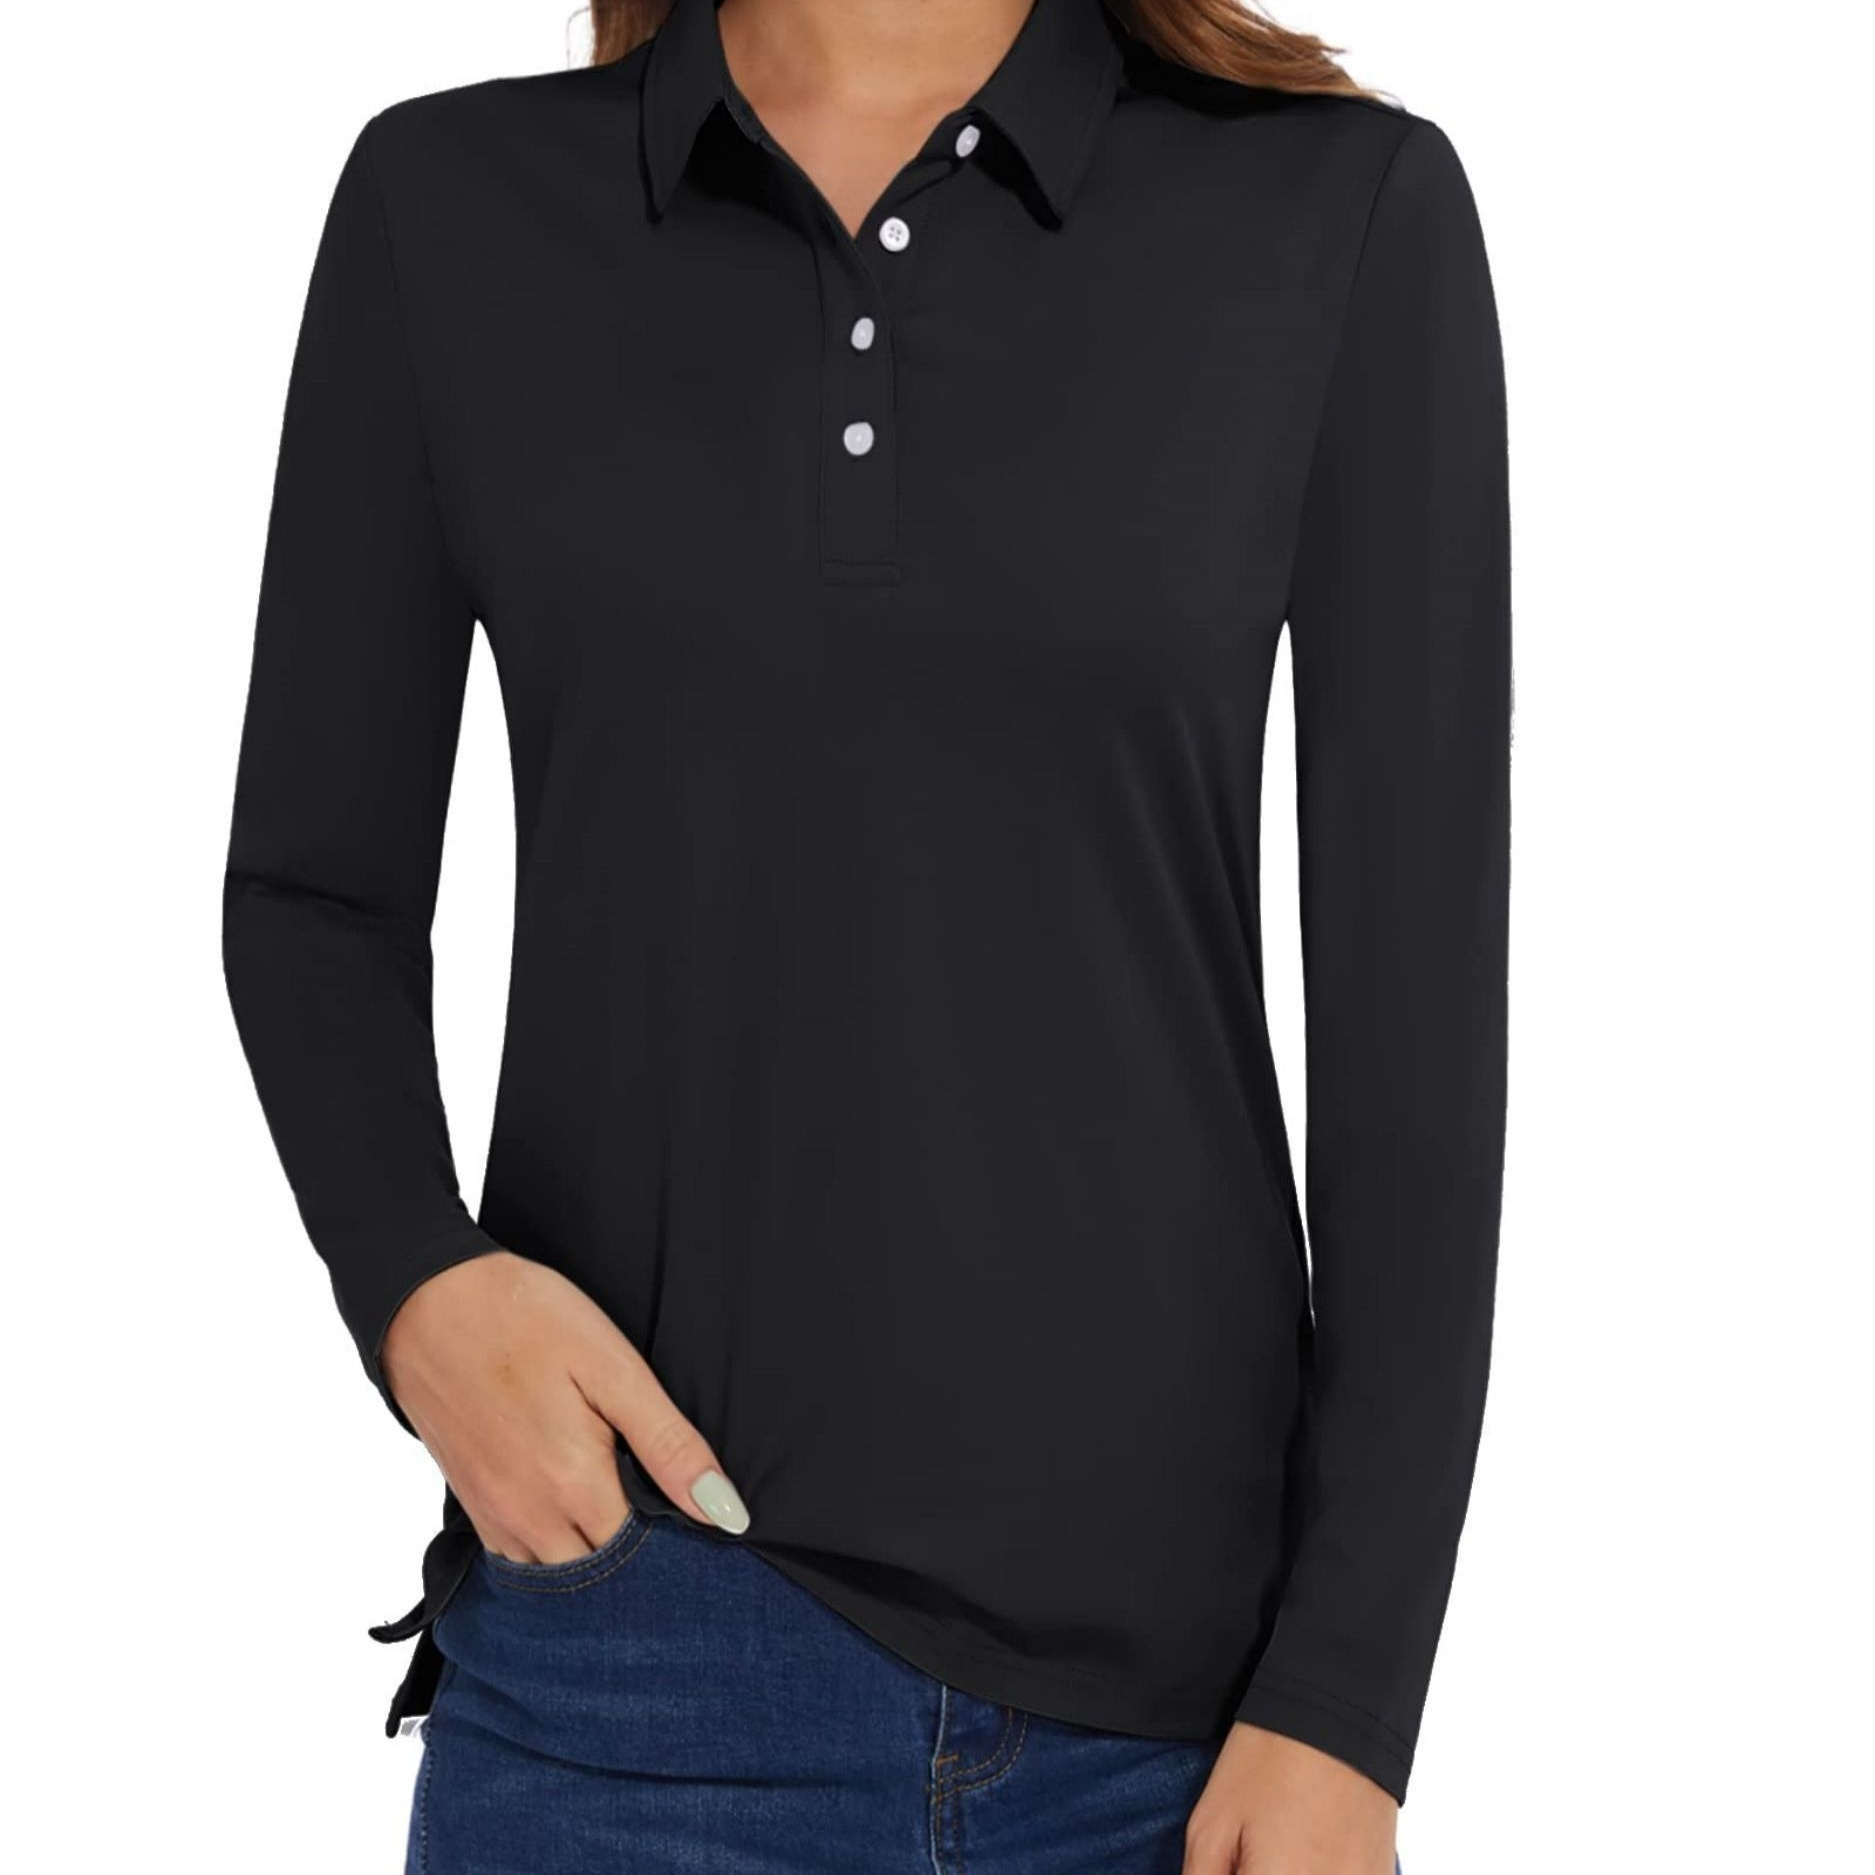 

Women's Long Sleeve Polo Shirt, Slim Fit Sports Tee, Sun Protection Lightweight Golf Work Top, Pullover Design With Side Slit & Buttons, Classic Collared Athletic Shirt